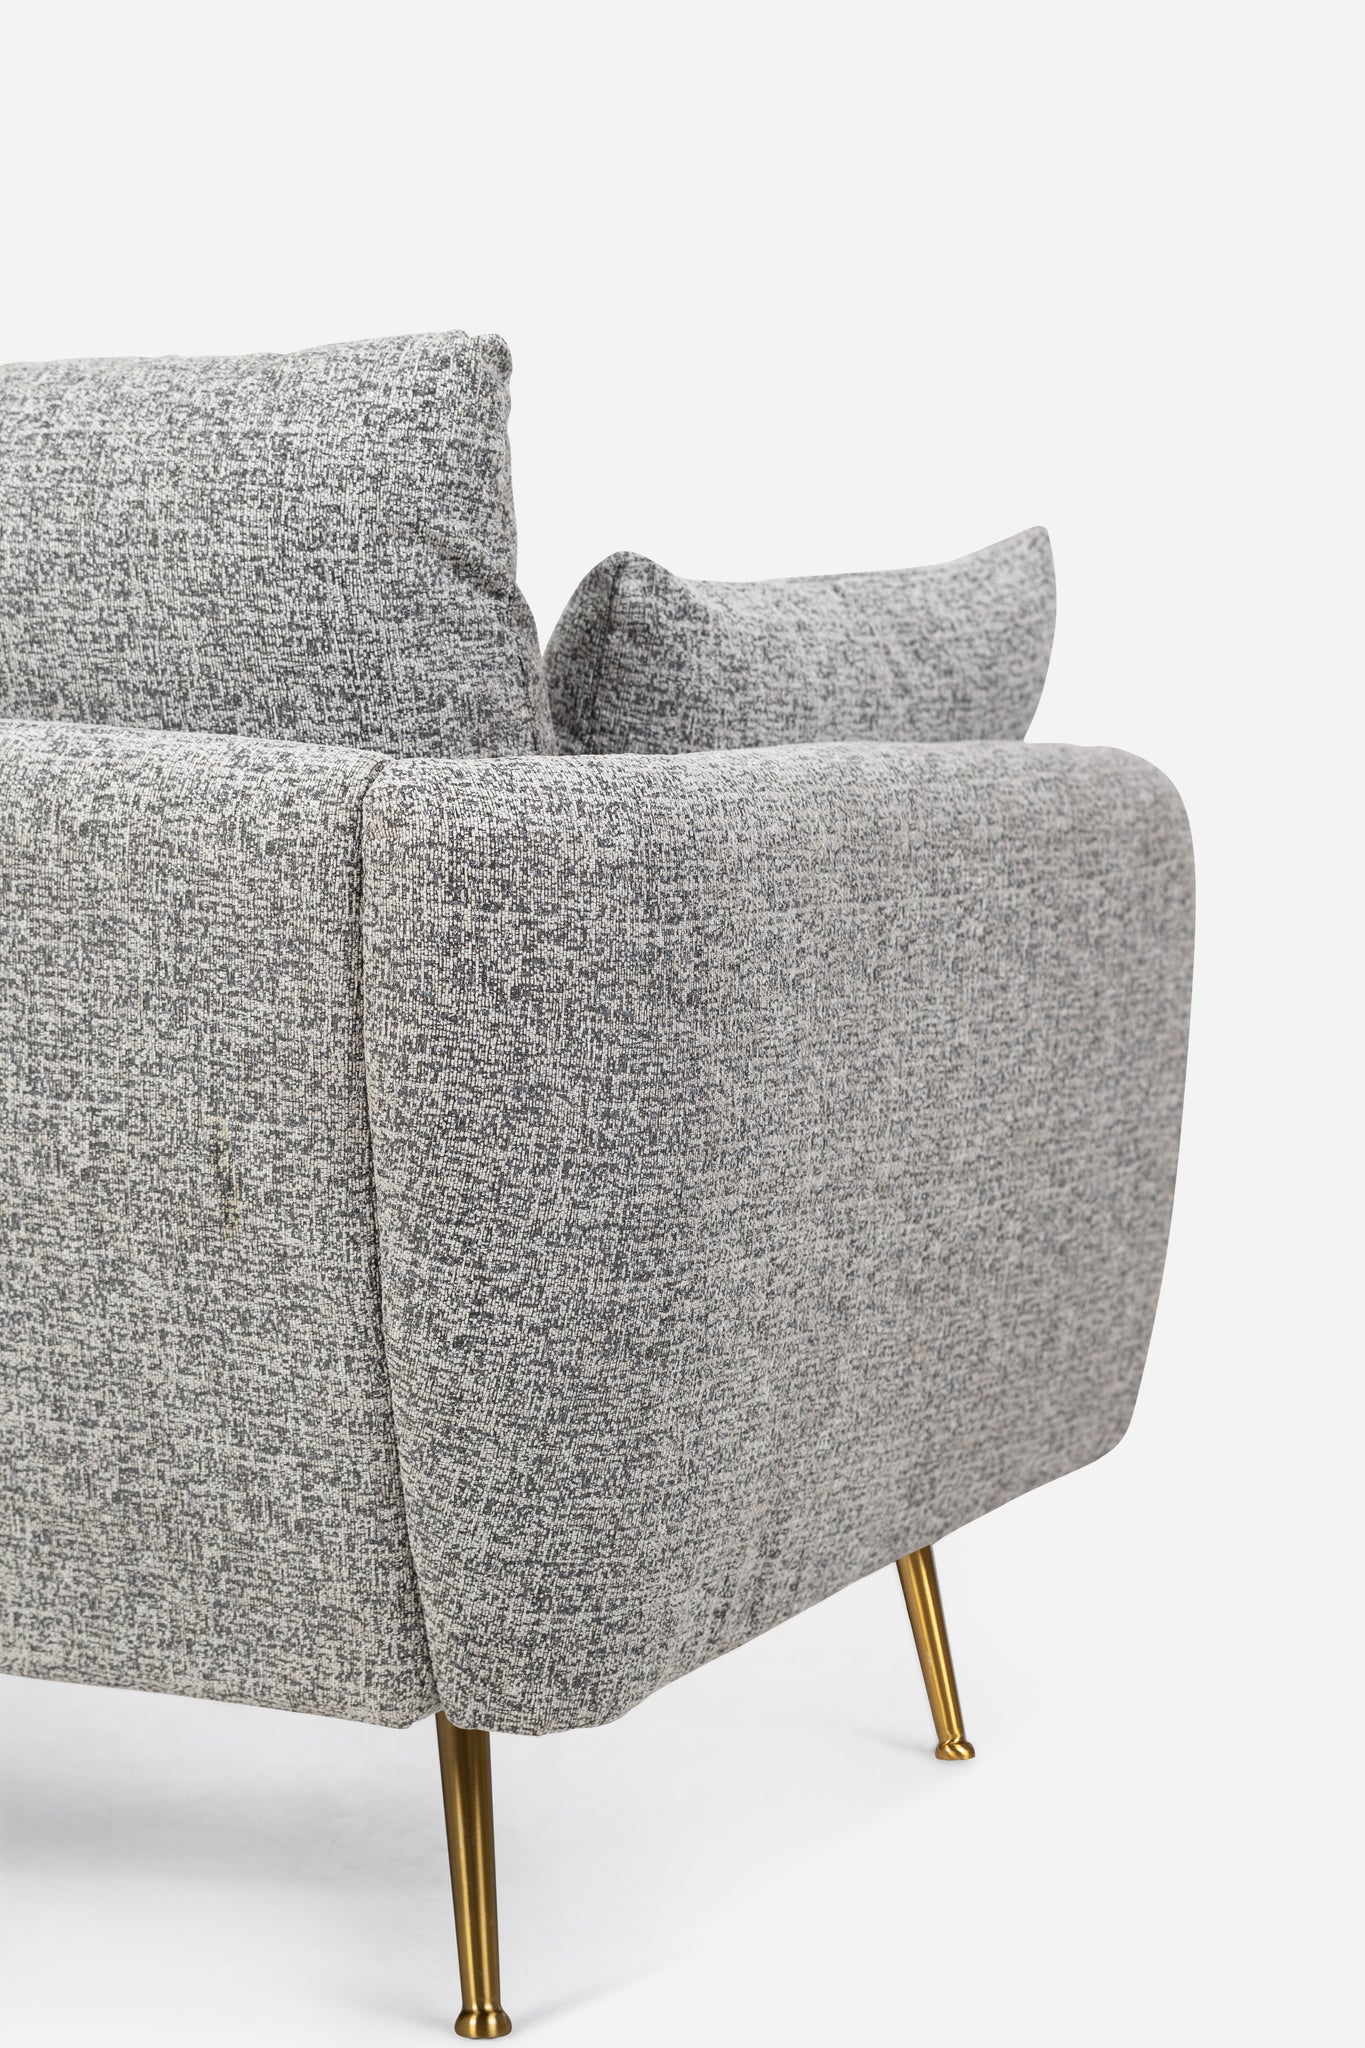 park sofa shown in grey fabric with gold legs